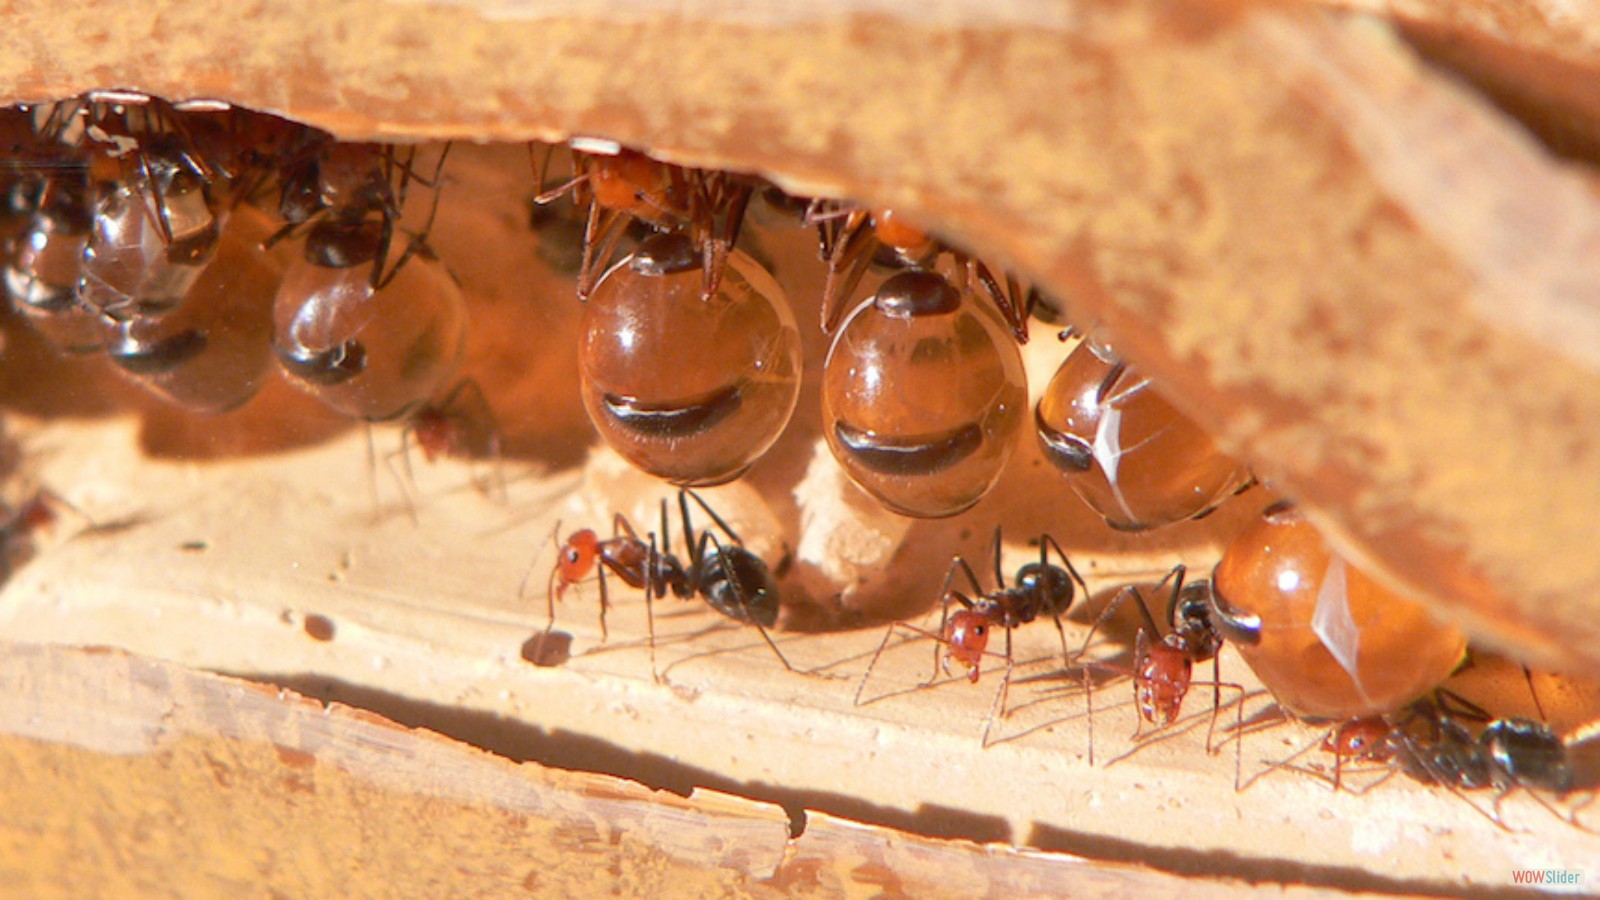 Honeypot ant workers hang upside down in their colony. Photo by Greg Hume